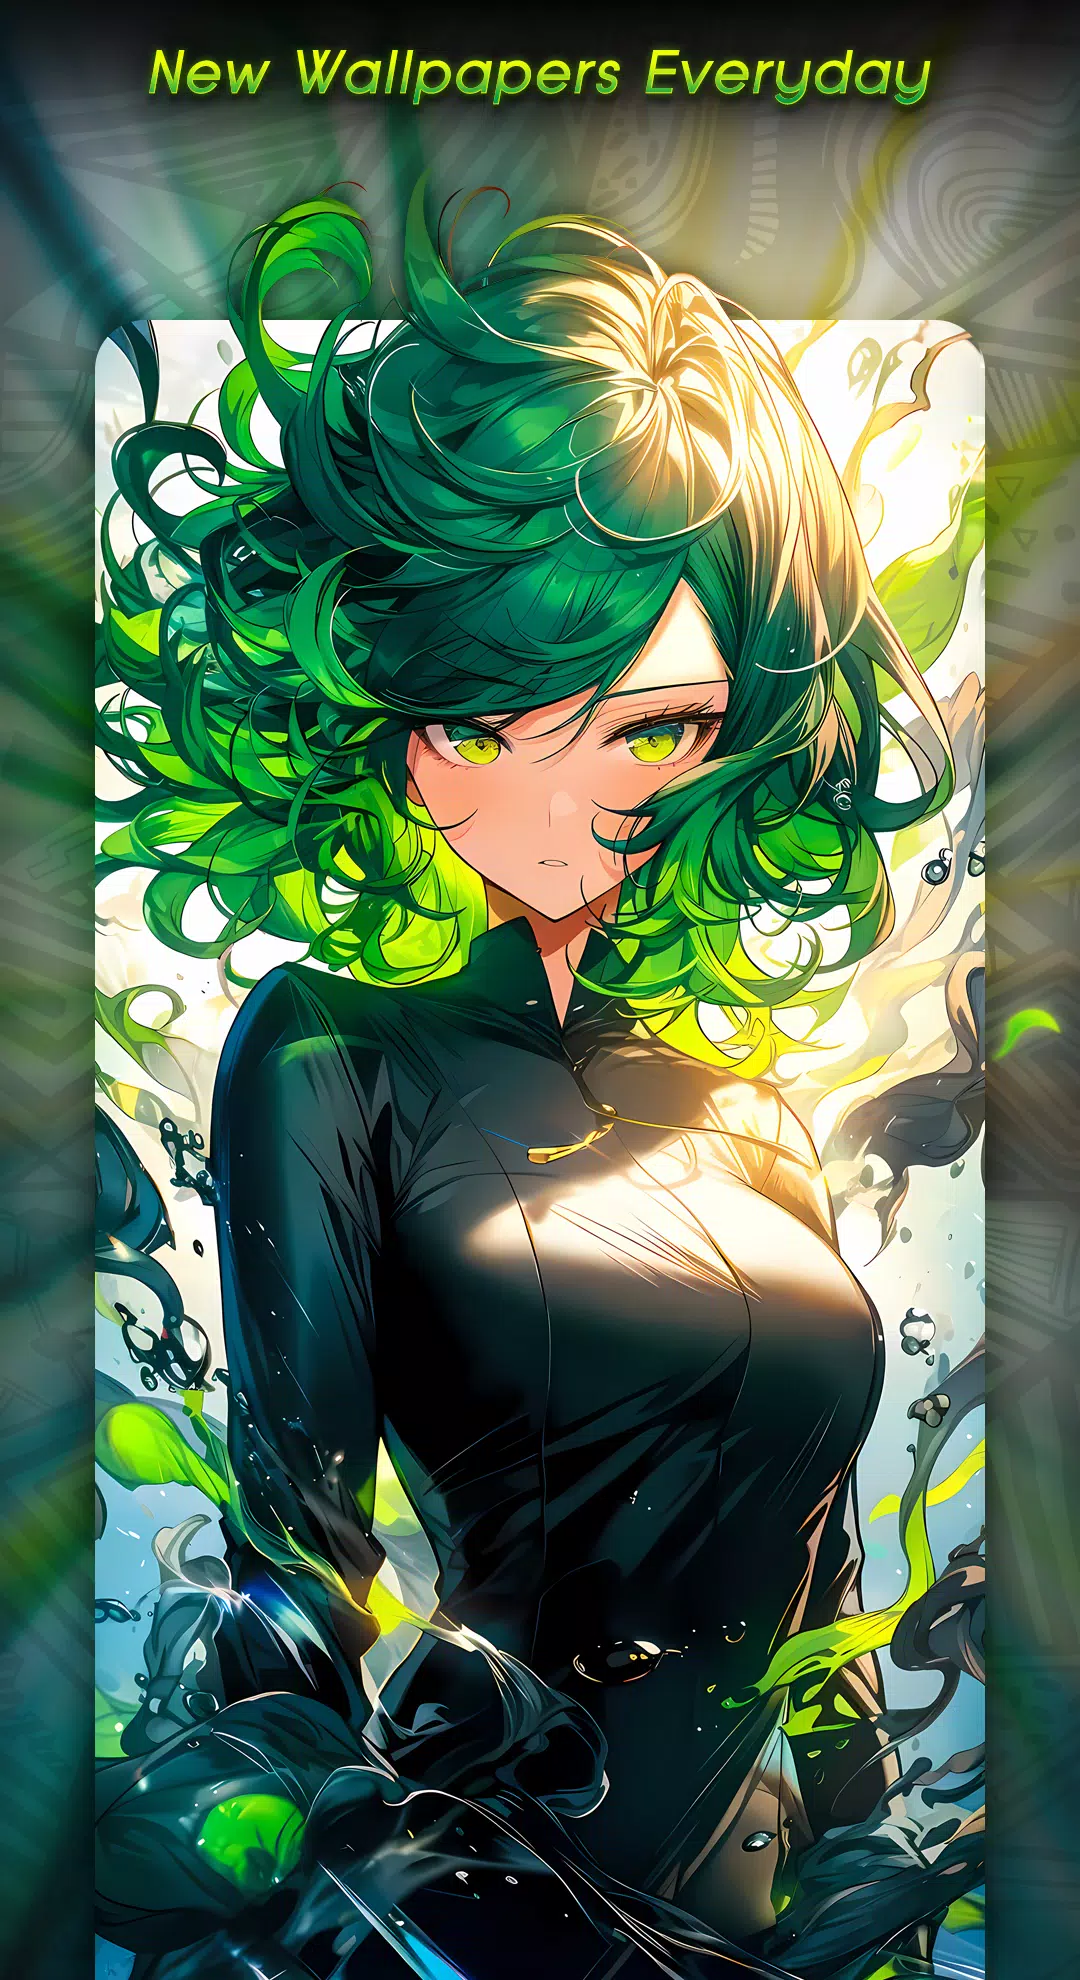 Anime Fan Art Wallpapers v23 APK for Android Download